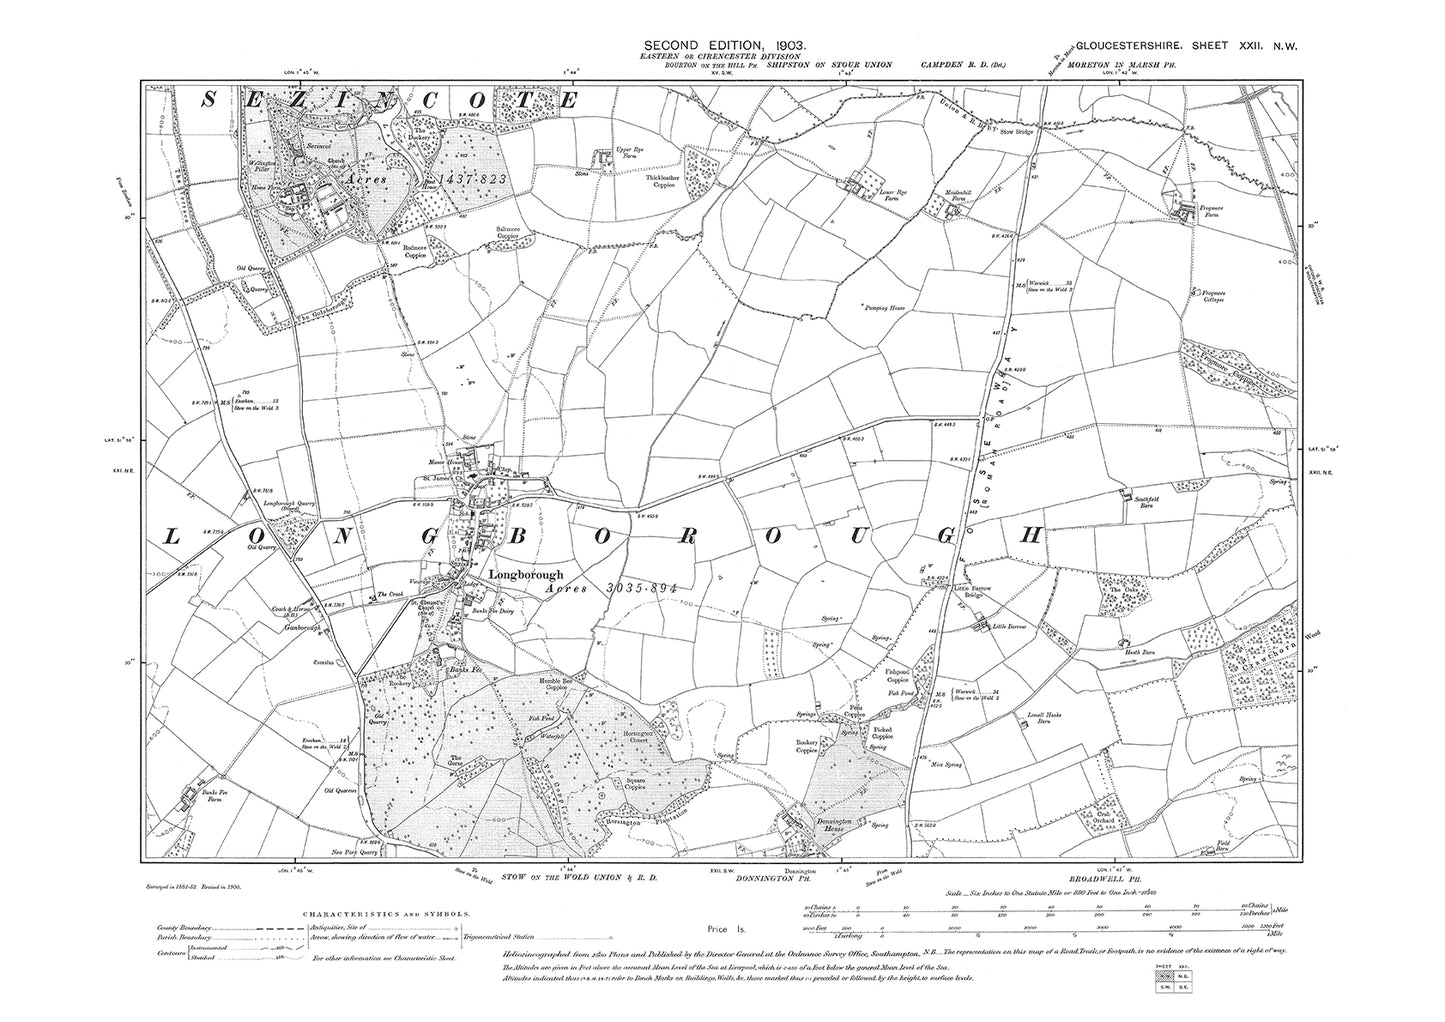 Old OS map dated 1903, showing Longborough in Gloucestershire - 22NW